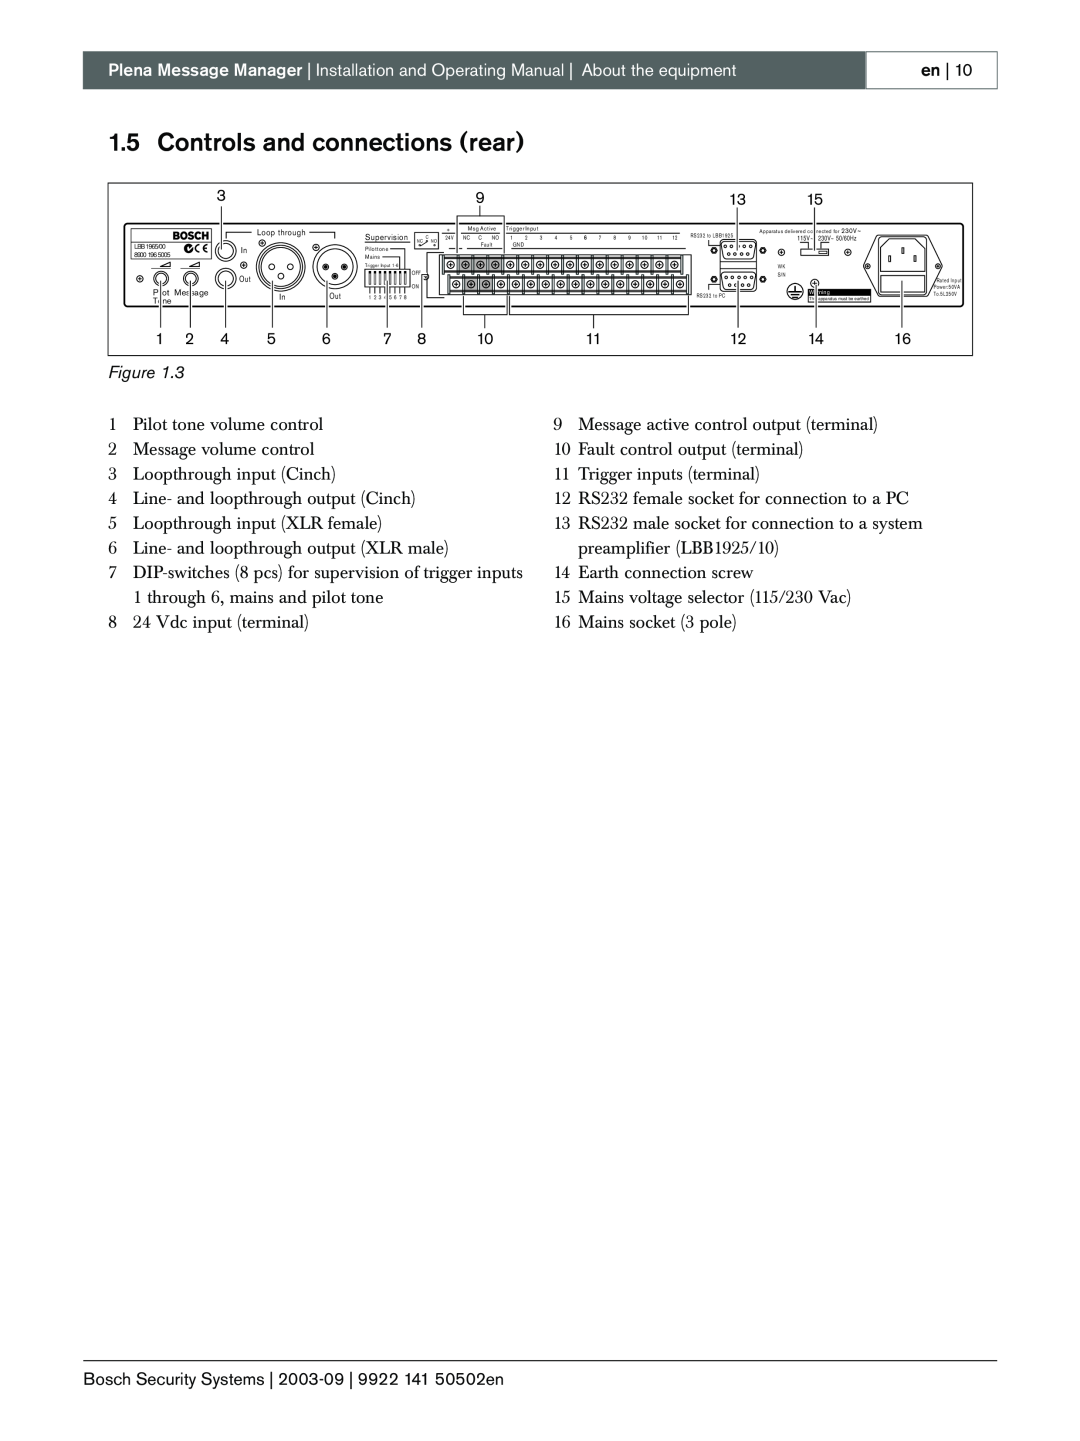 Bosch Appliances LBB 1965 manual Controls and connections rear 